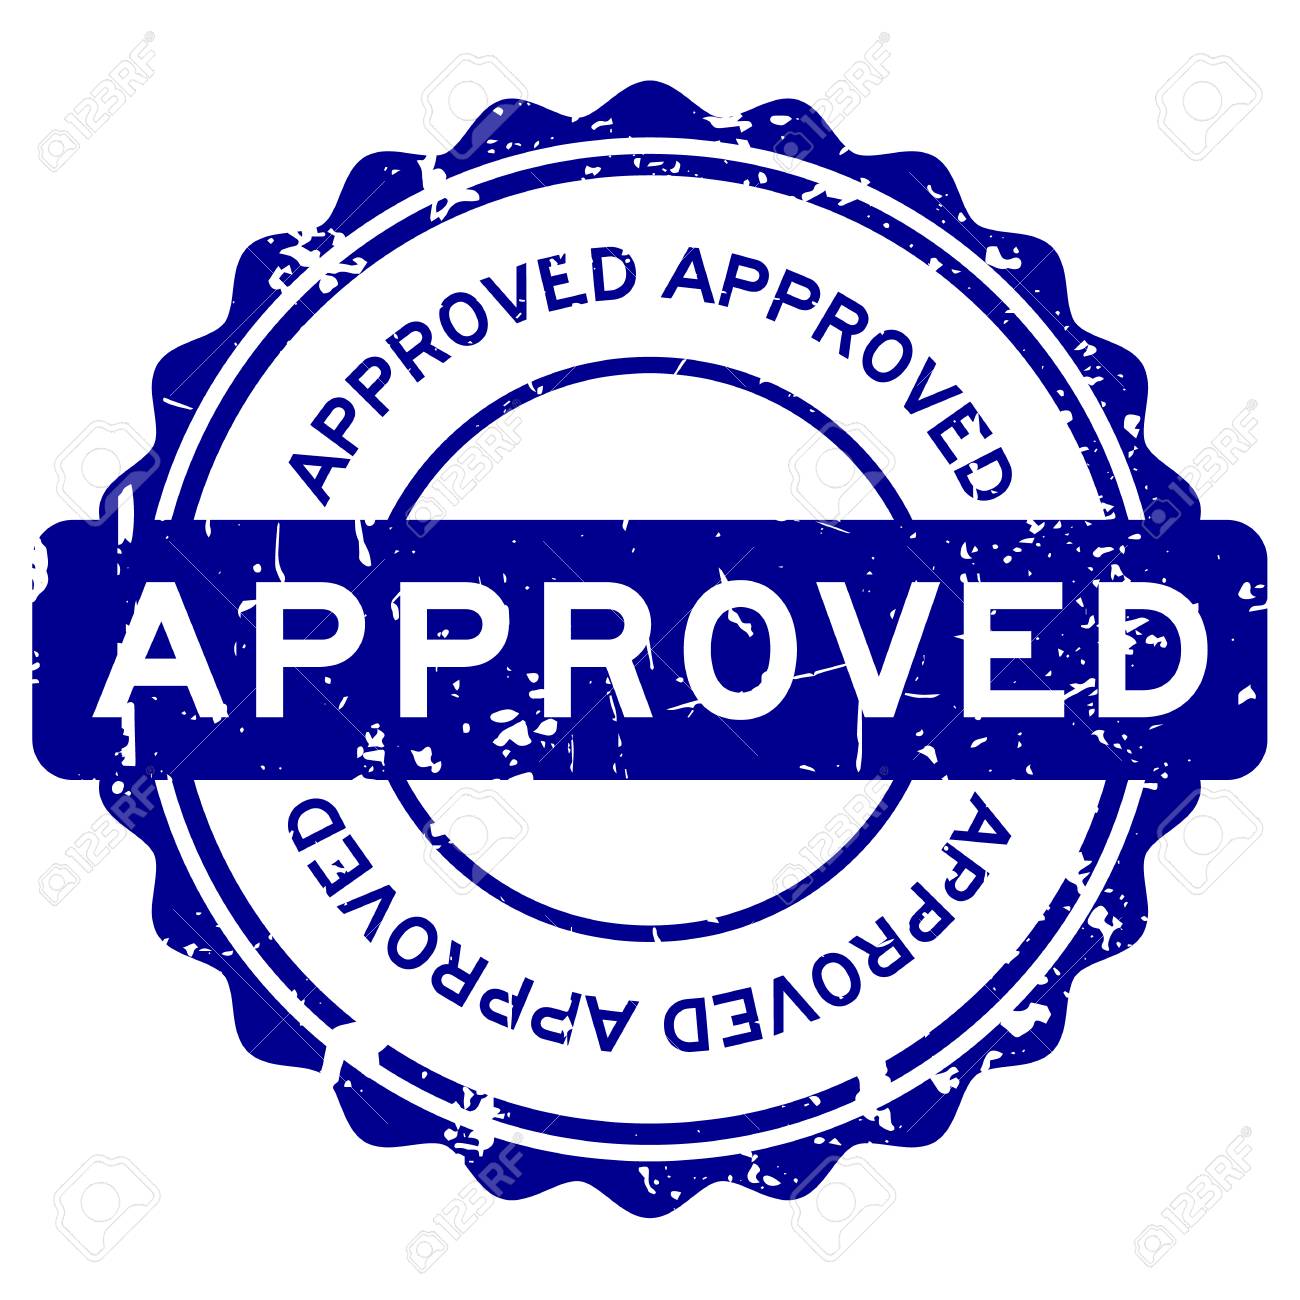 72858681-grunge-blue-approve-round-rubber-seal-stamp-on-white-background.jpg